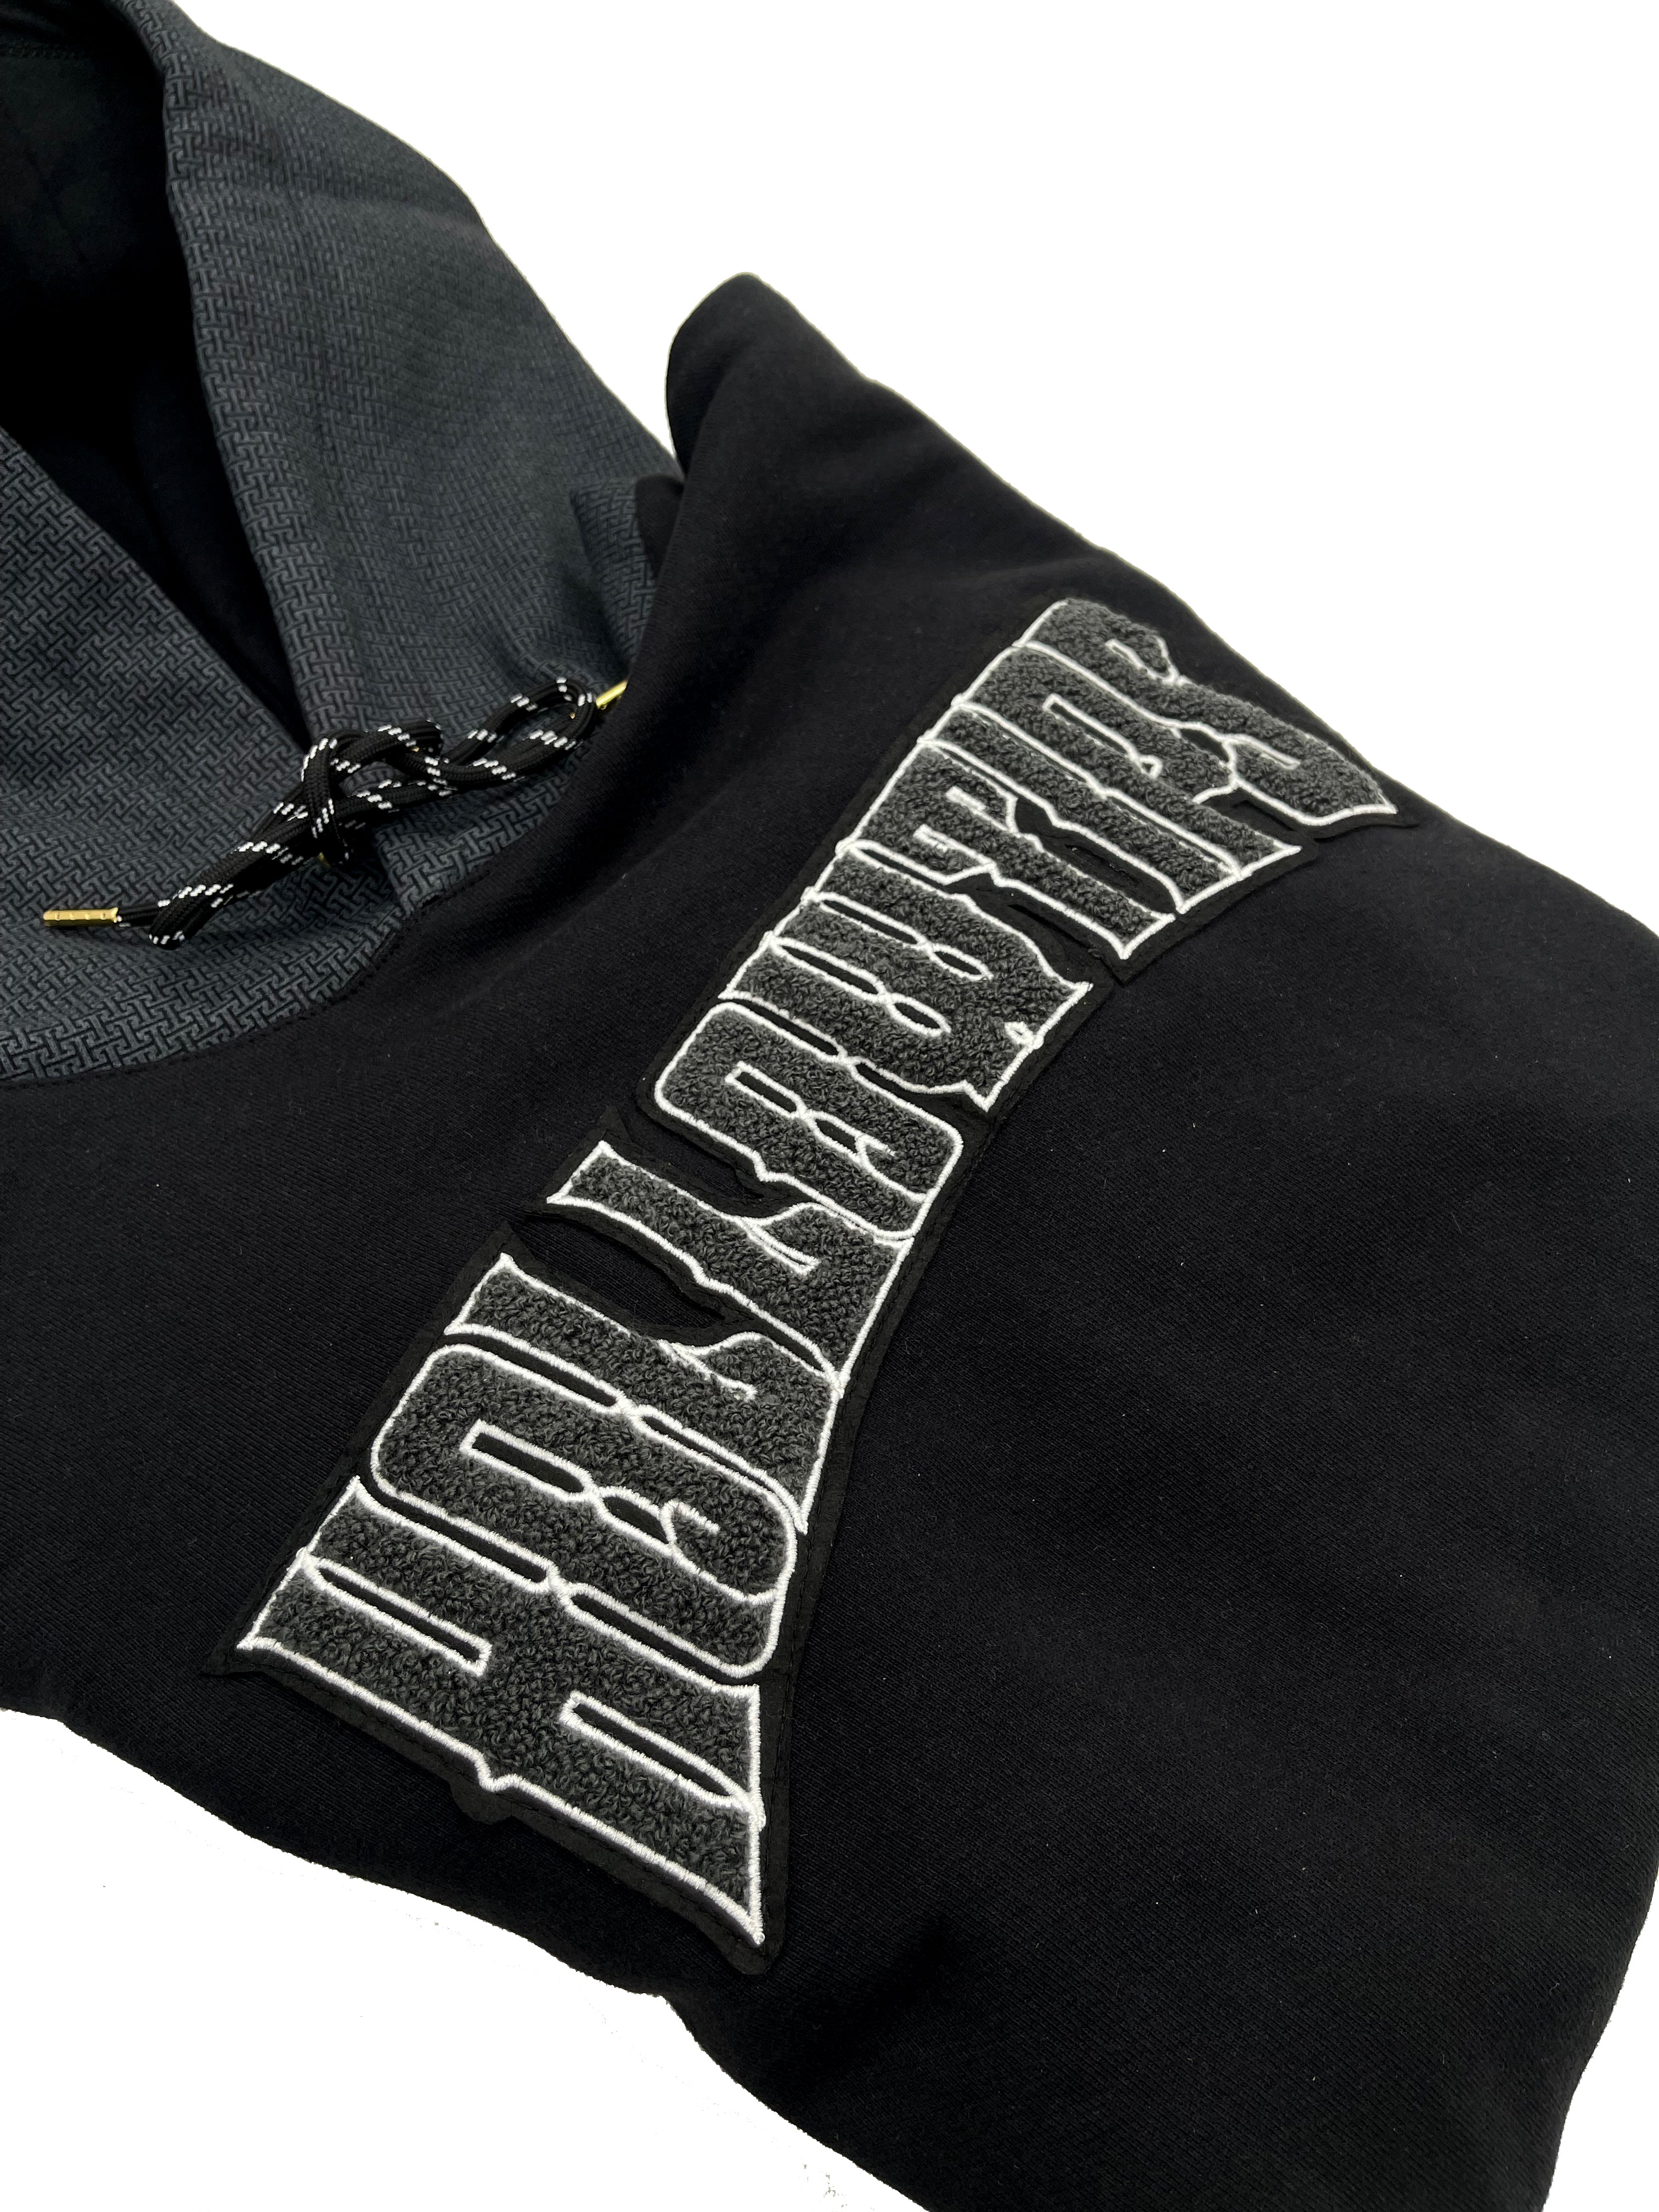 Hollowtips Chenille Patch Hoodie.